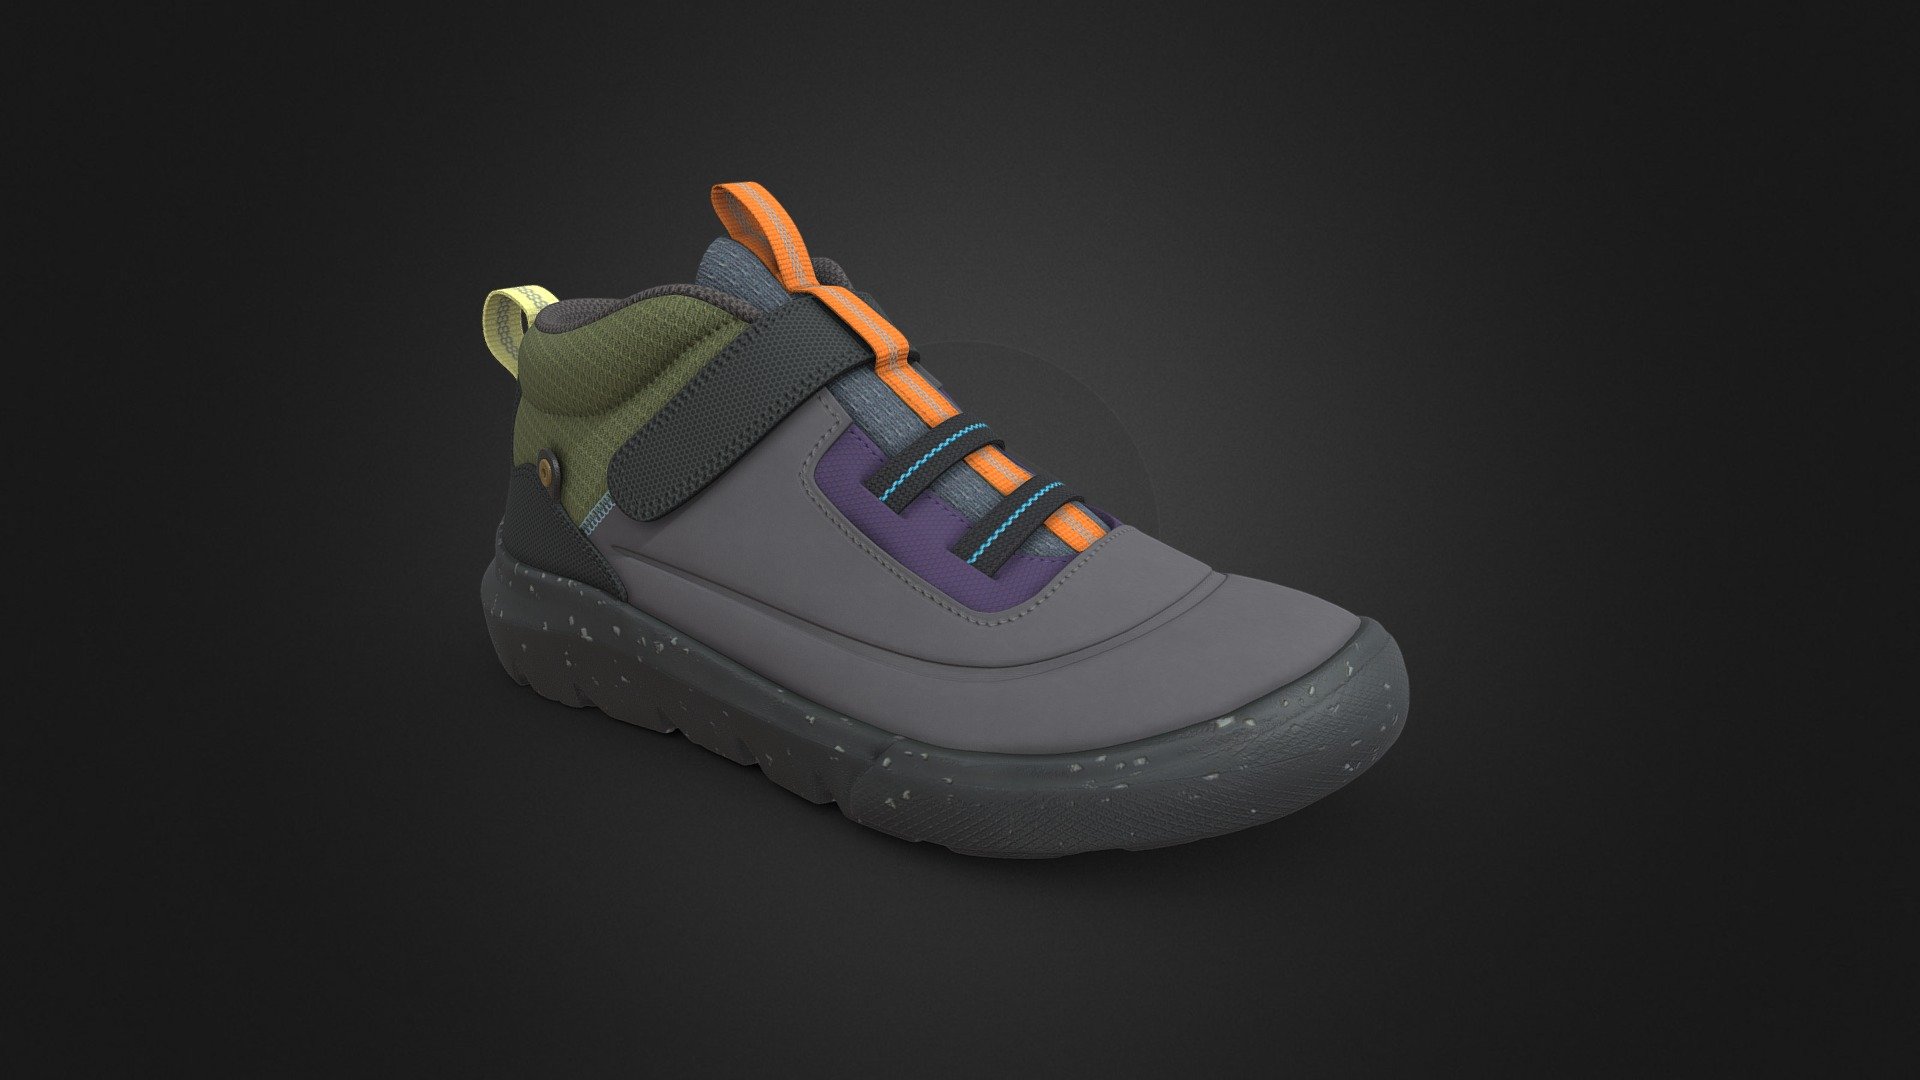 High Definition 3D Shoes Scan converted to Optimized Quad Mesh with PBR Texture for WebAR, AR/VR, Rendering, Animation - Skyline Shoes - 3D model by Sonic Render (@cgbug) 3d model